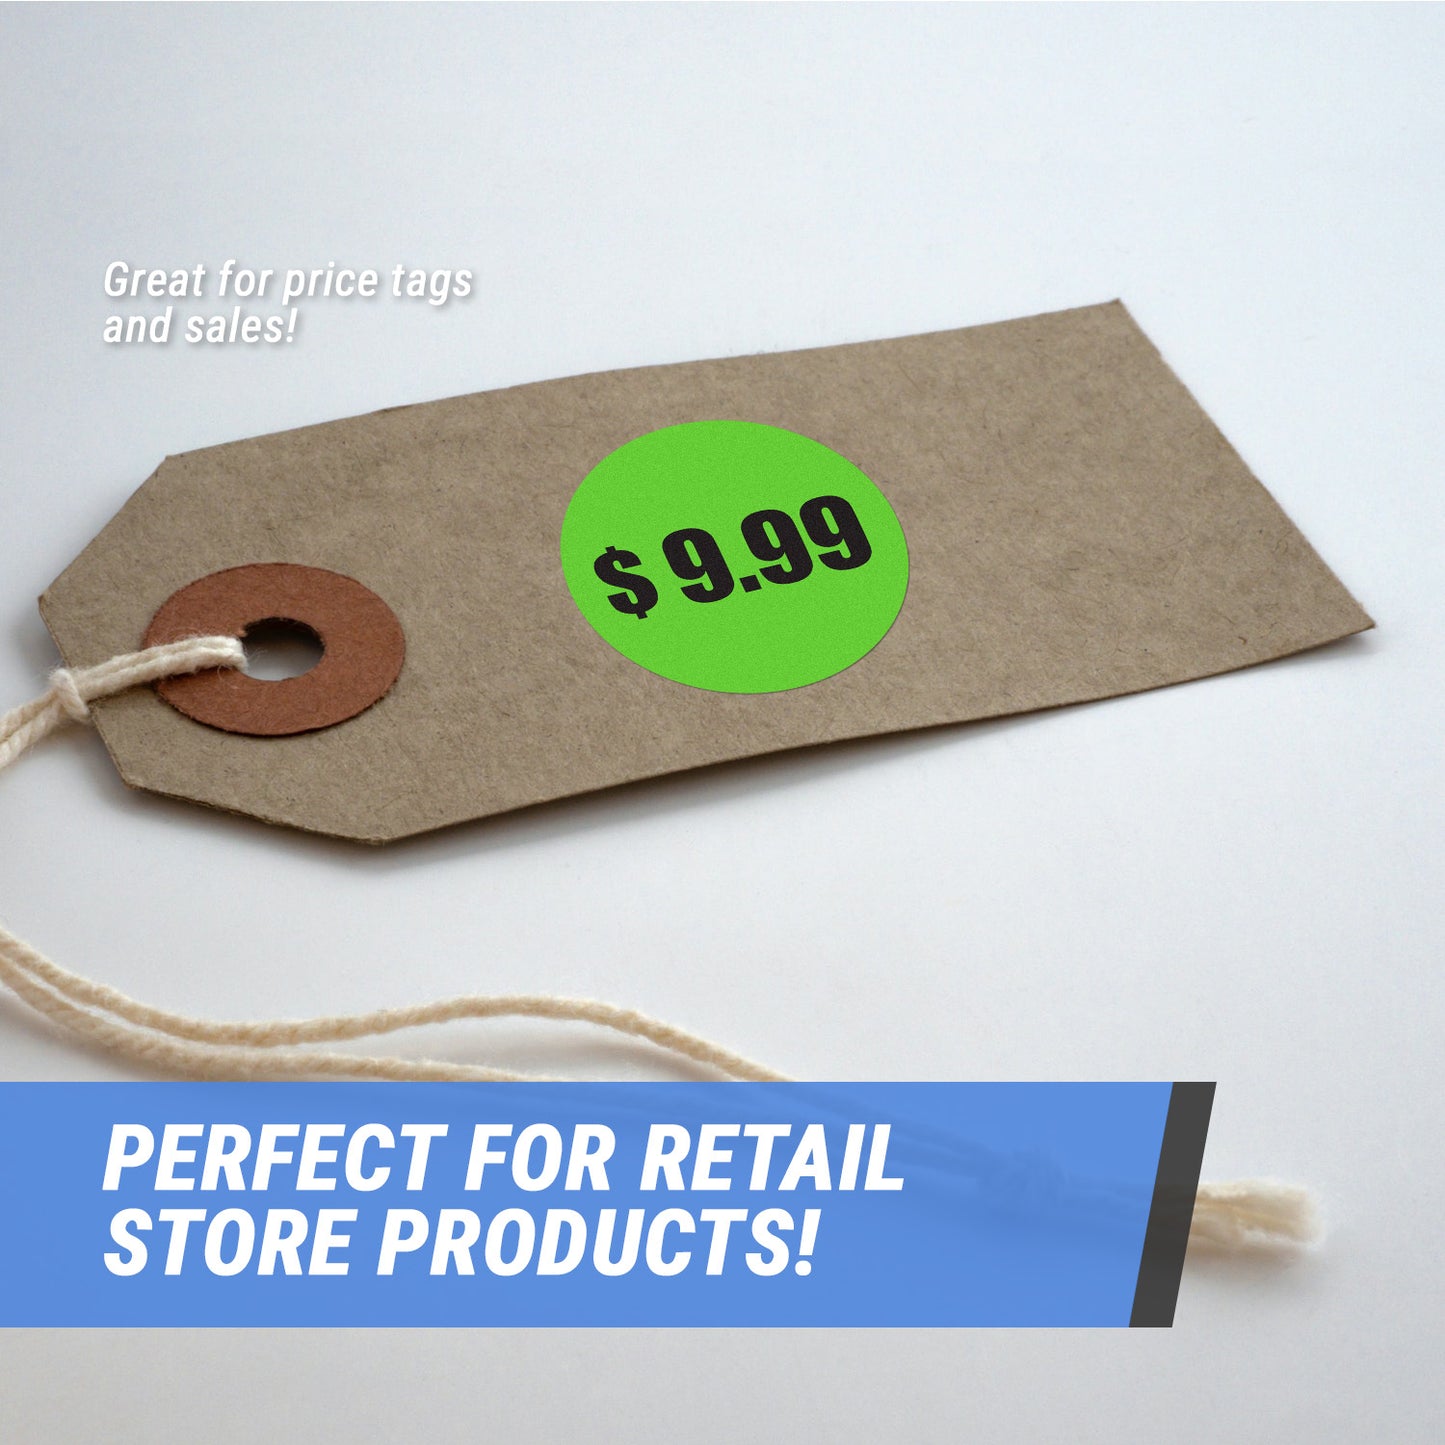 1.5 inch | Retail & Sale: $9.99 Nine Dollars and 99 Cents Pricing Stickers